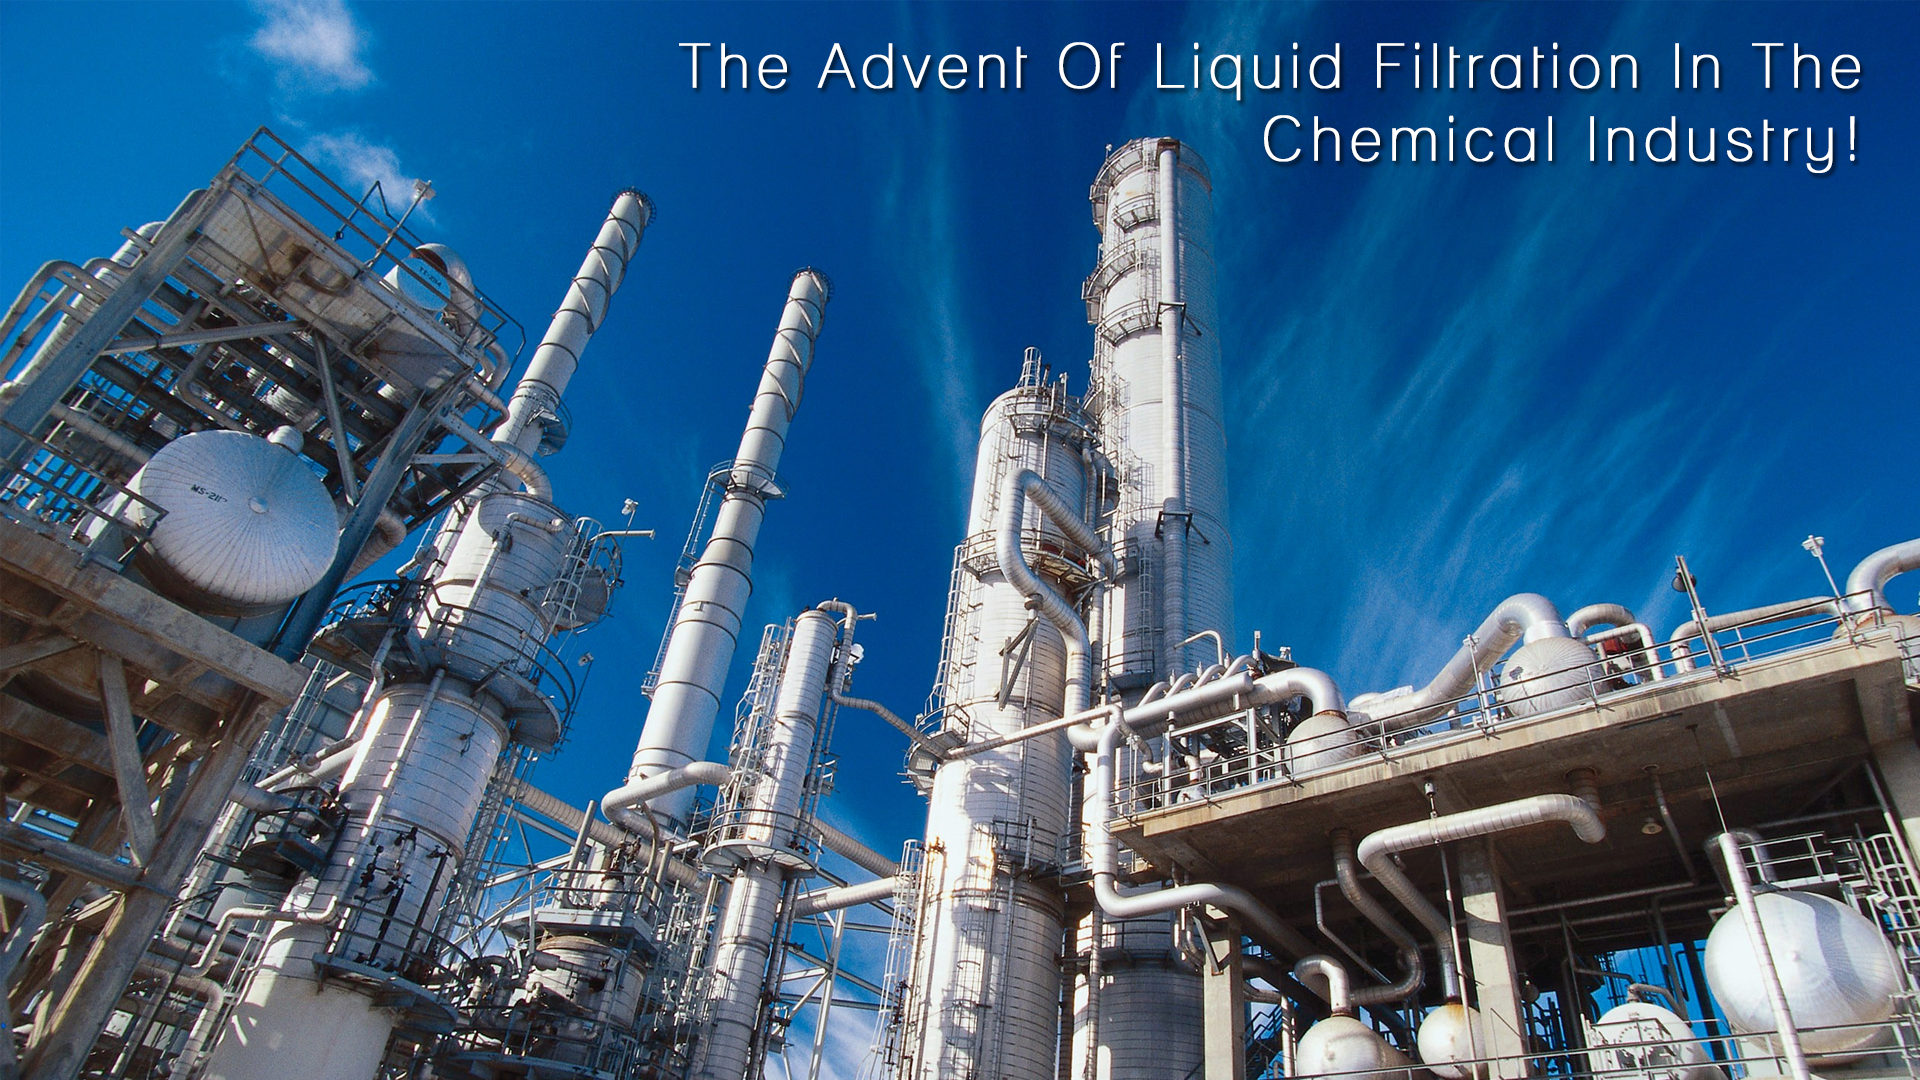 The Advent Of Liquid Filtration In The Chemical Industry